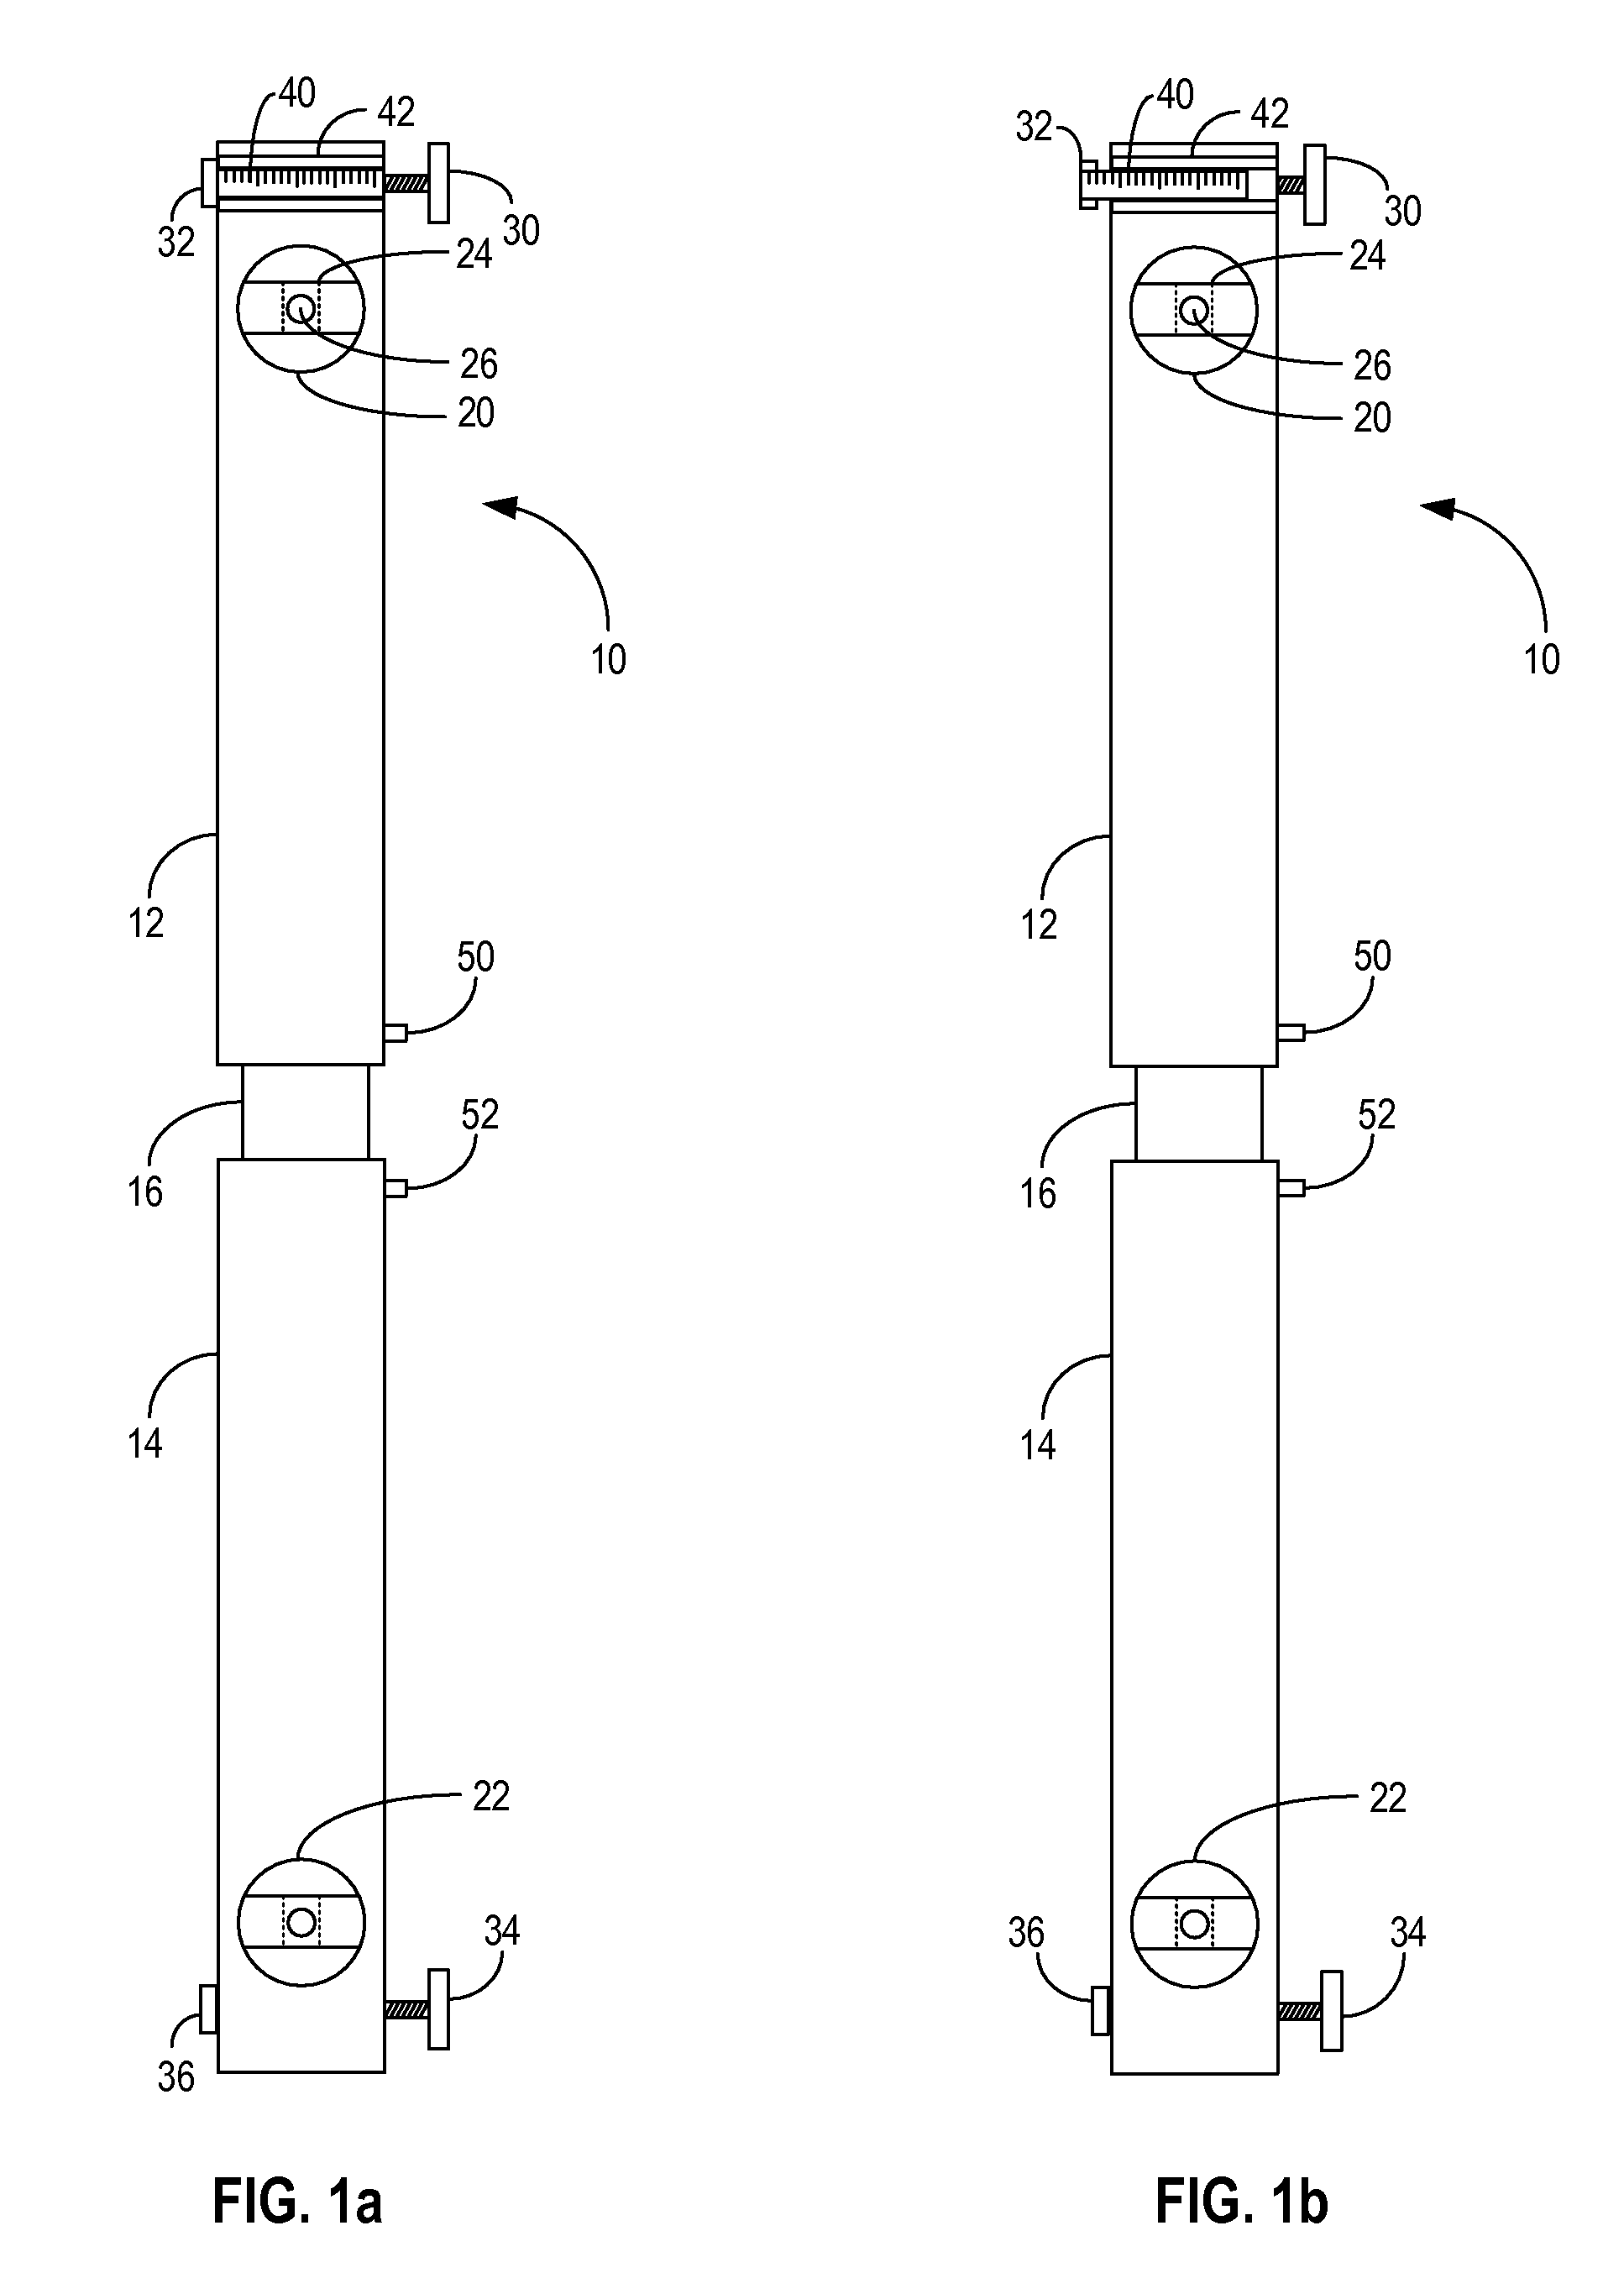 Extendable plumb and level measuring device and associated usage method